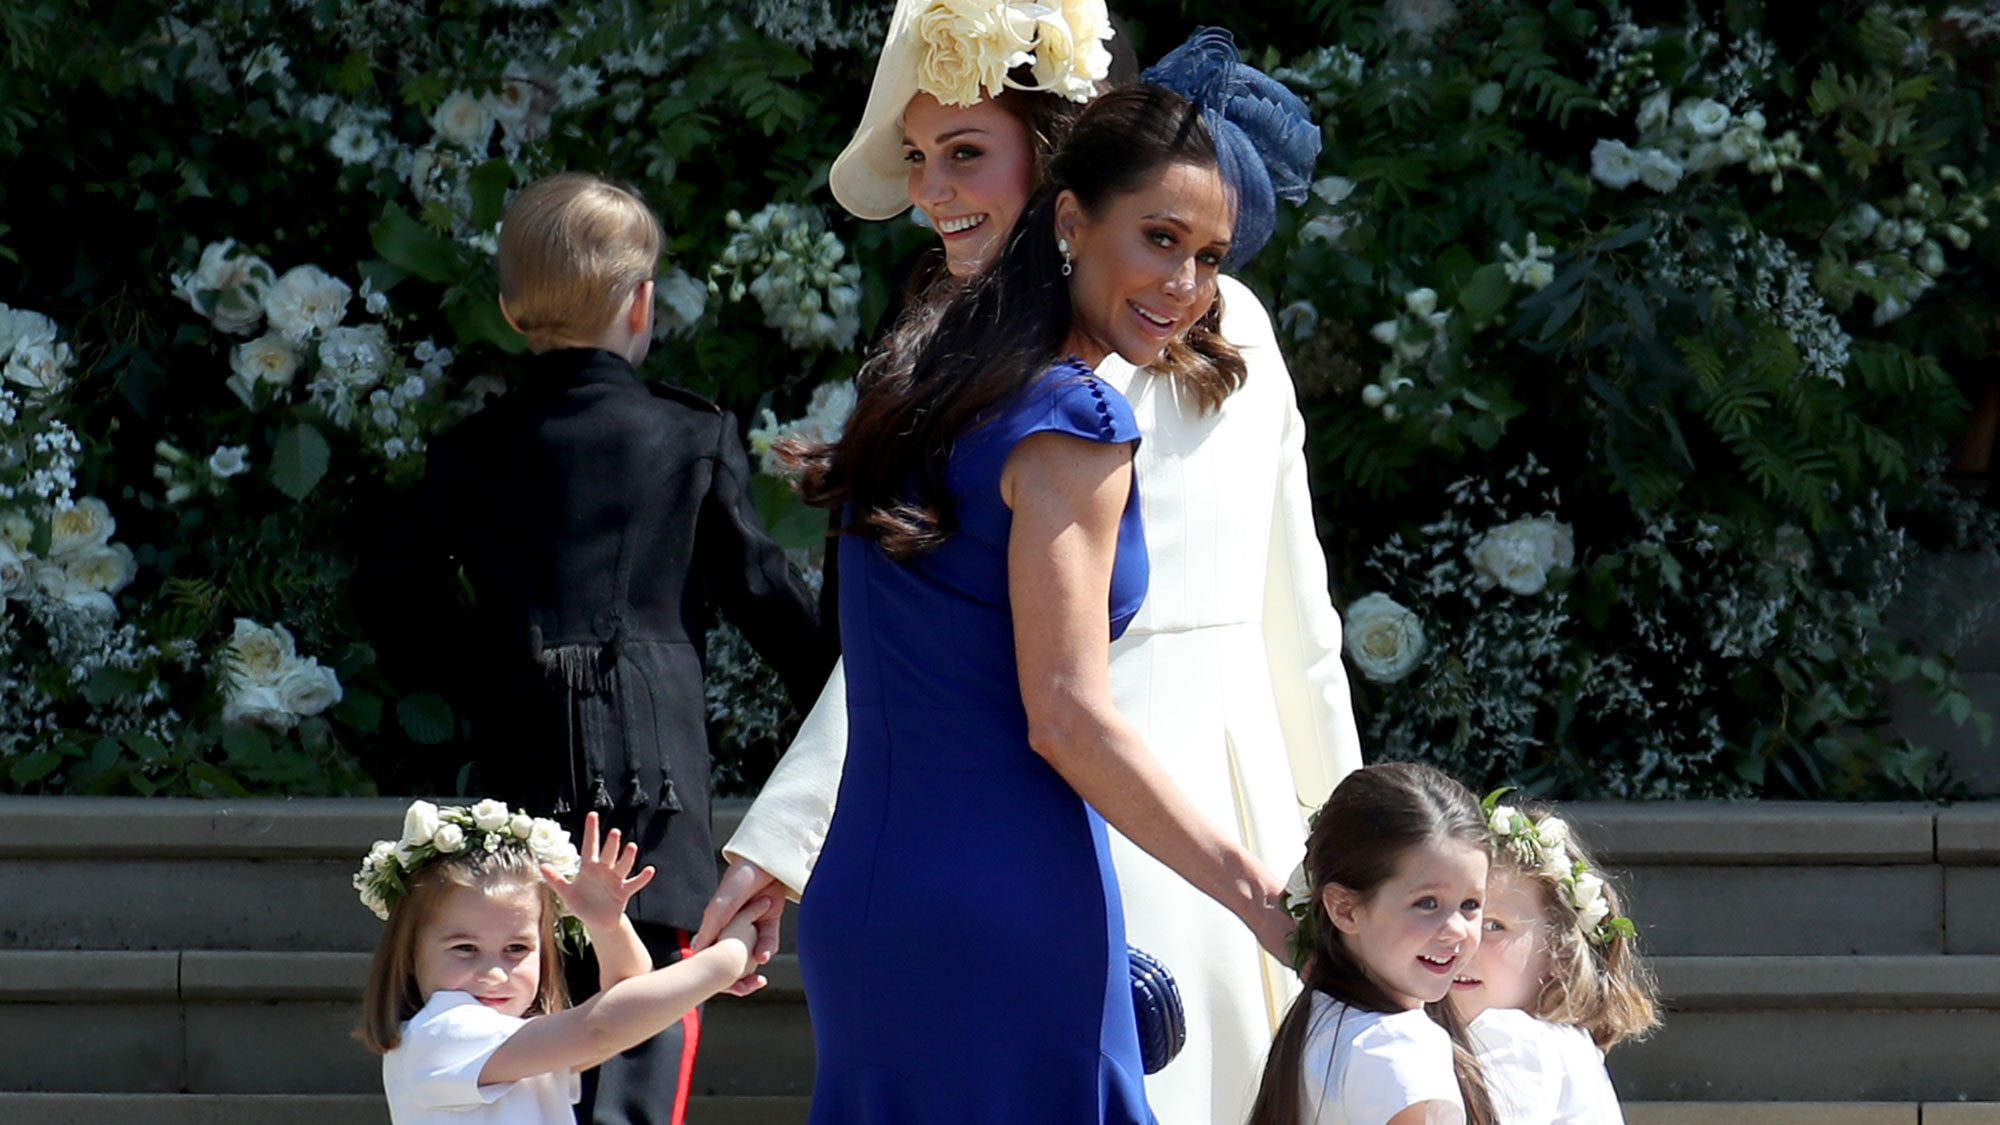 Apparently there’s a reason Jessica Mulroney wore blue to the royal wedding